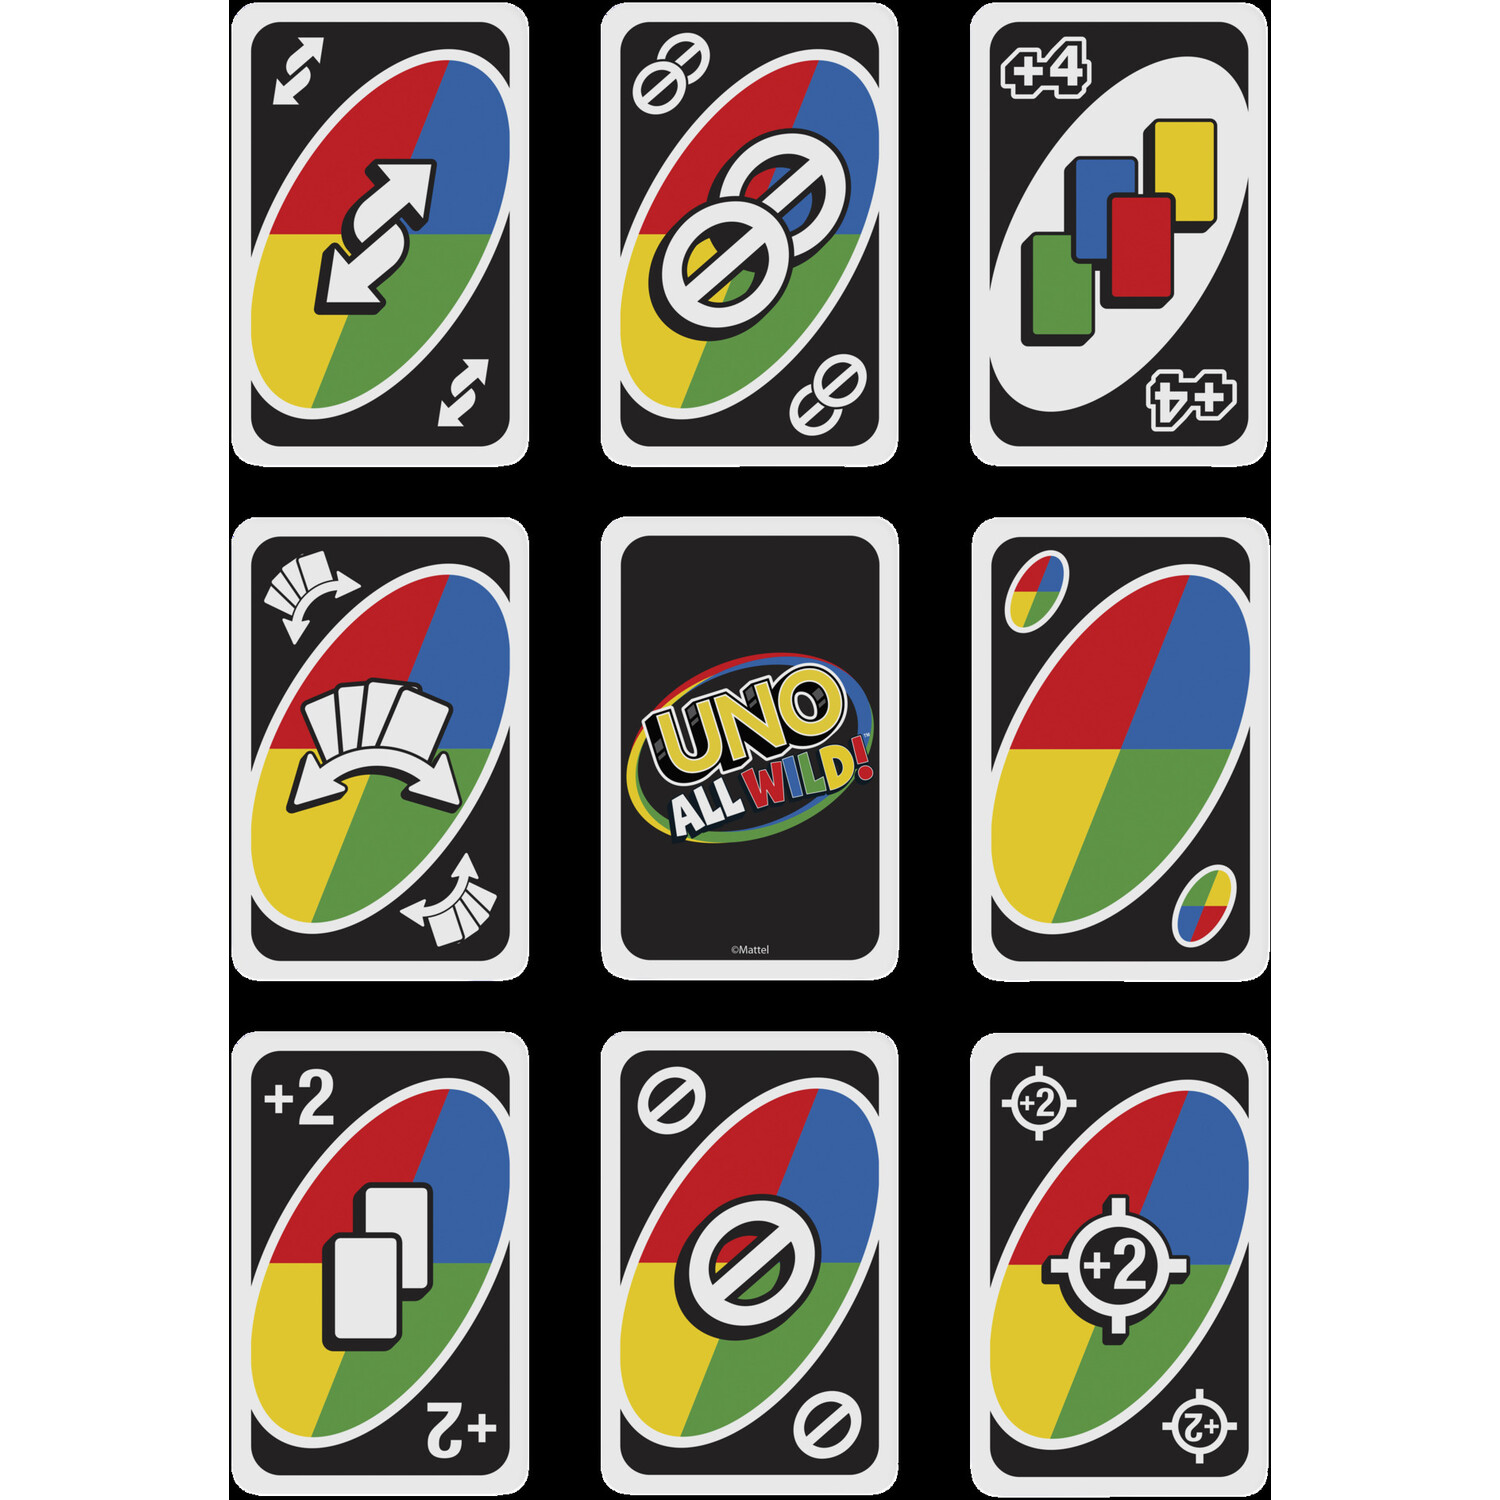 UNO All Wild Card Game Image 3